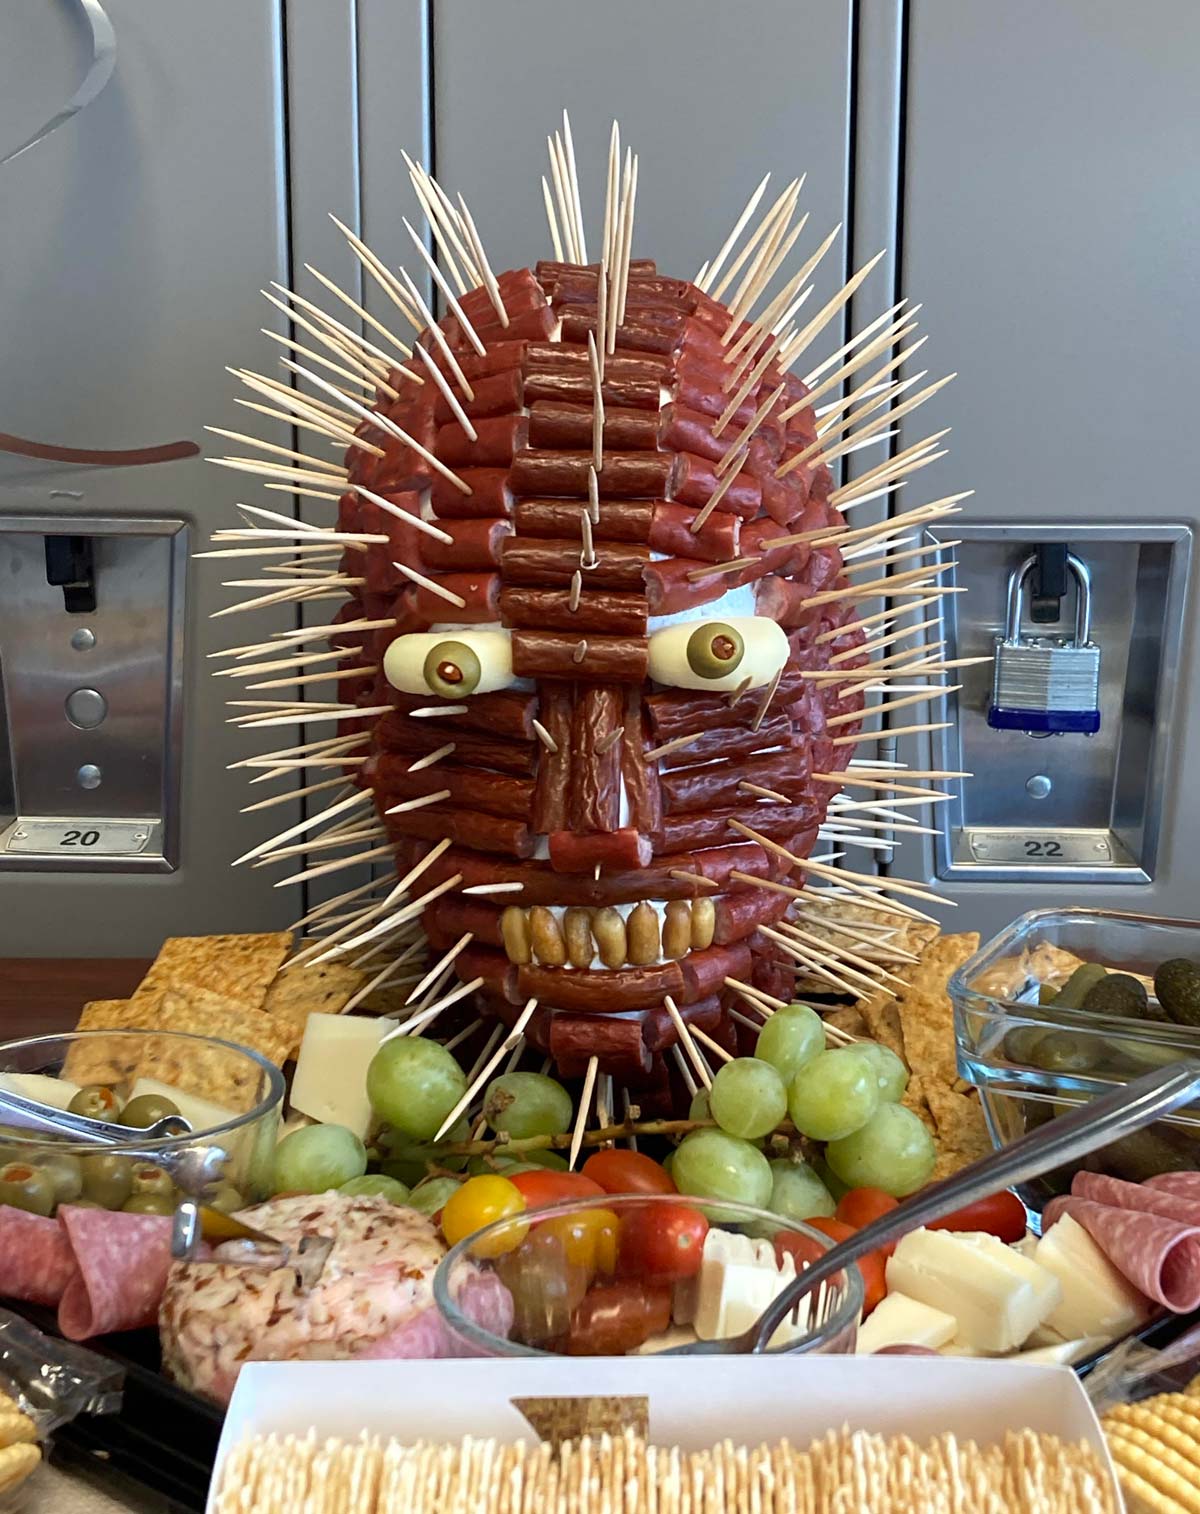 Pinhead meat and cheese tray